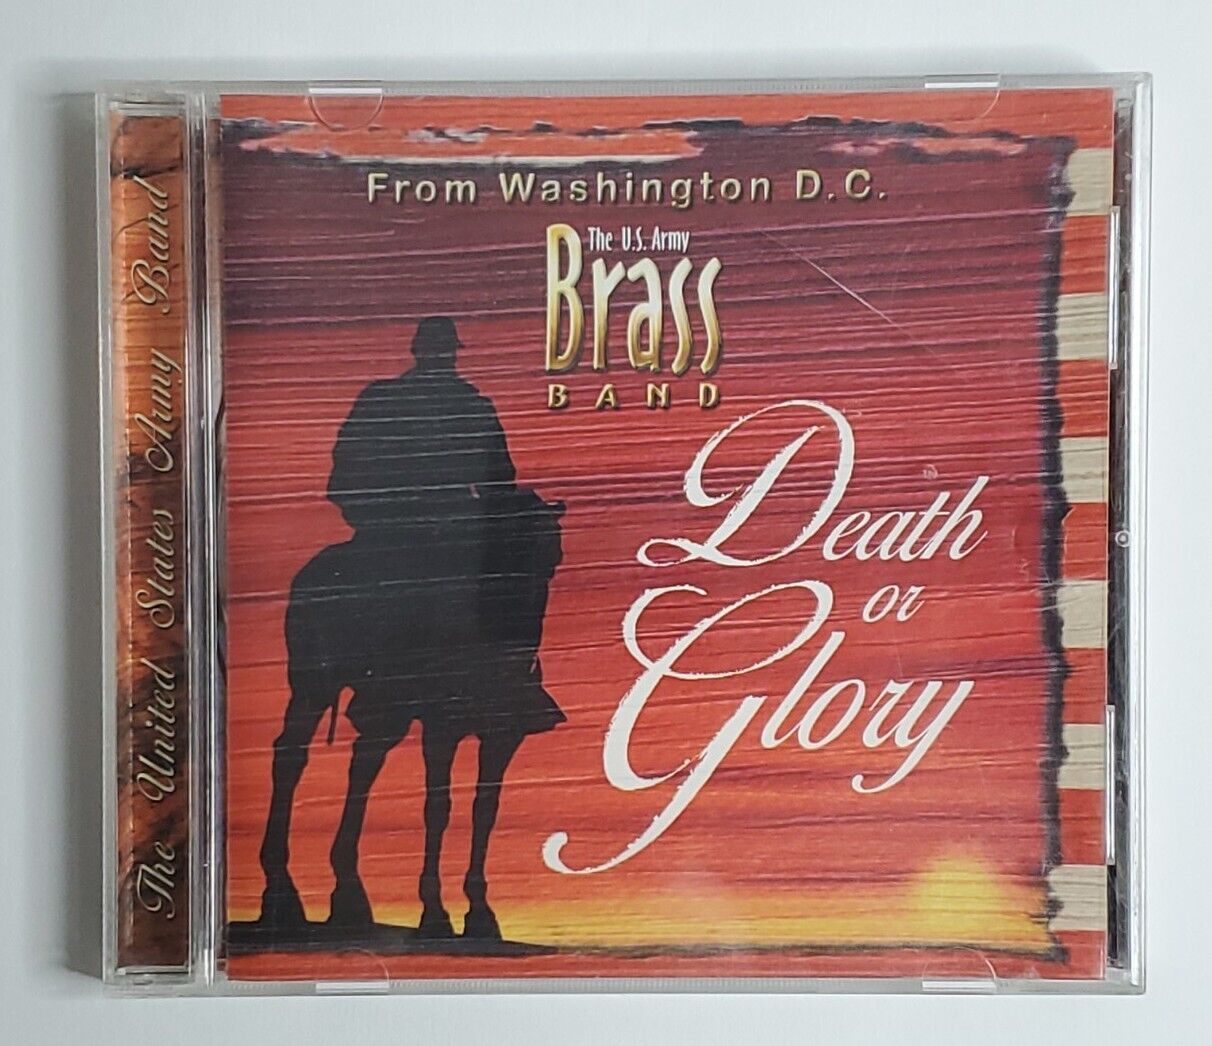 US Army Brass Band CD Audio Music Death or Glory Album 